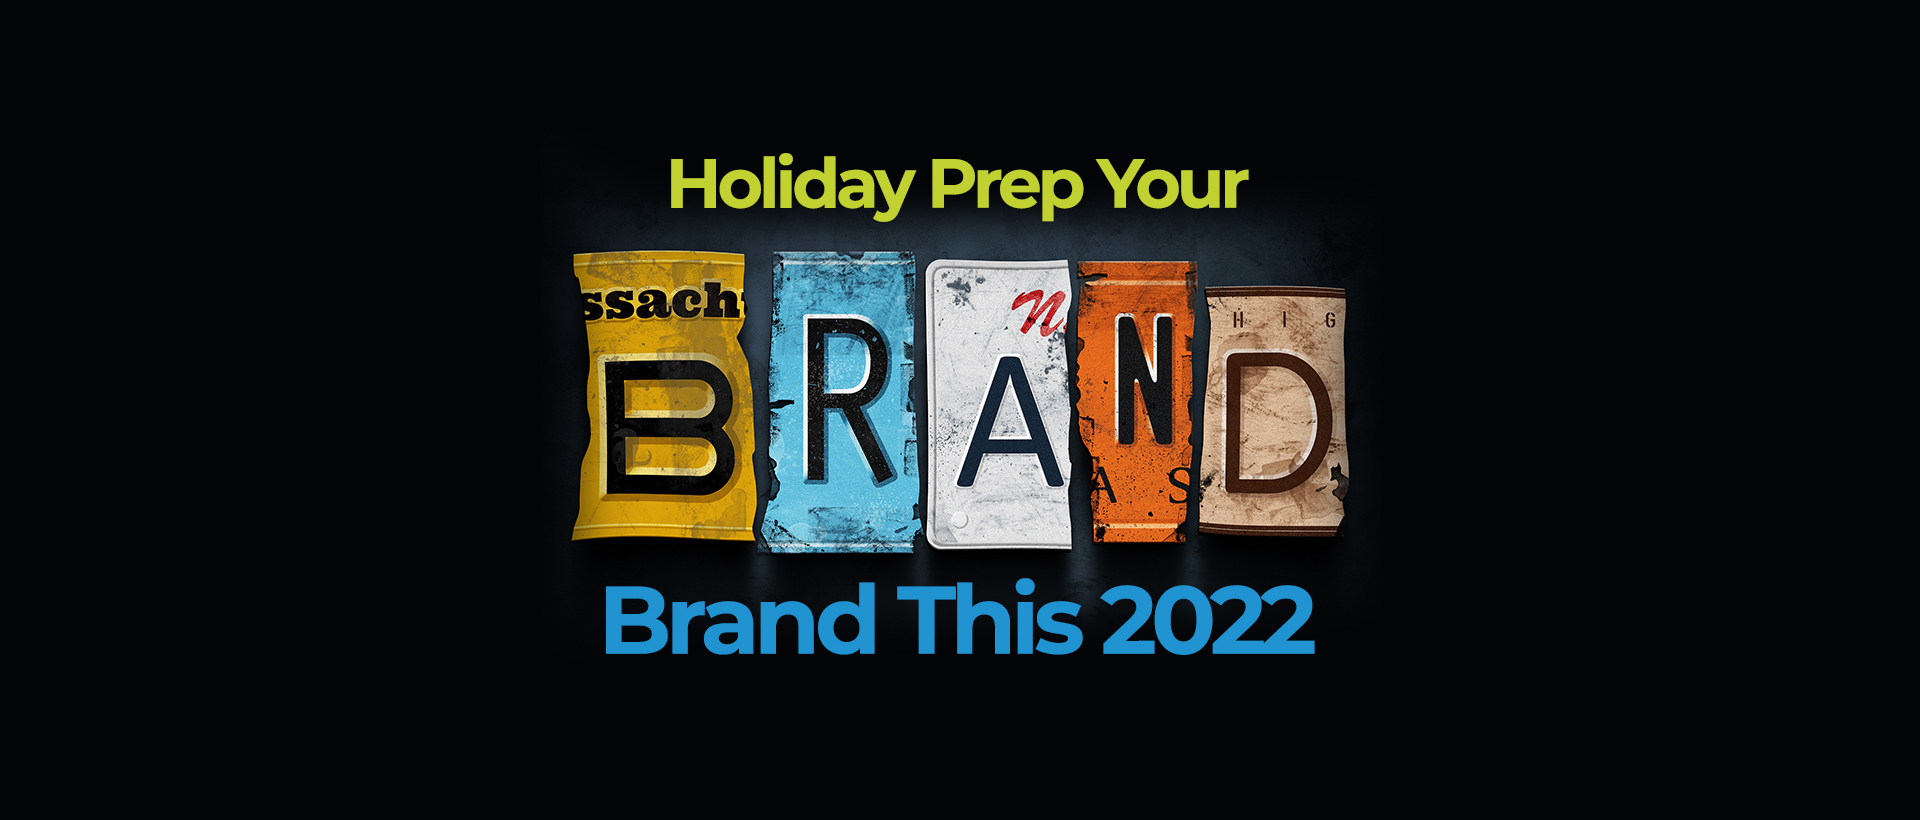 Holiday Prep Your Brand This 2022